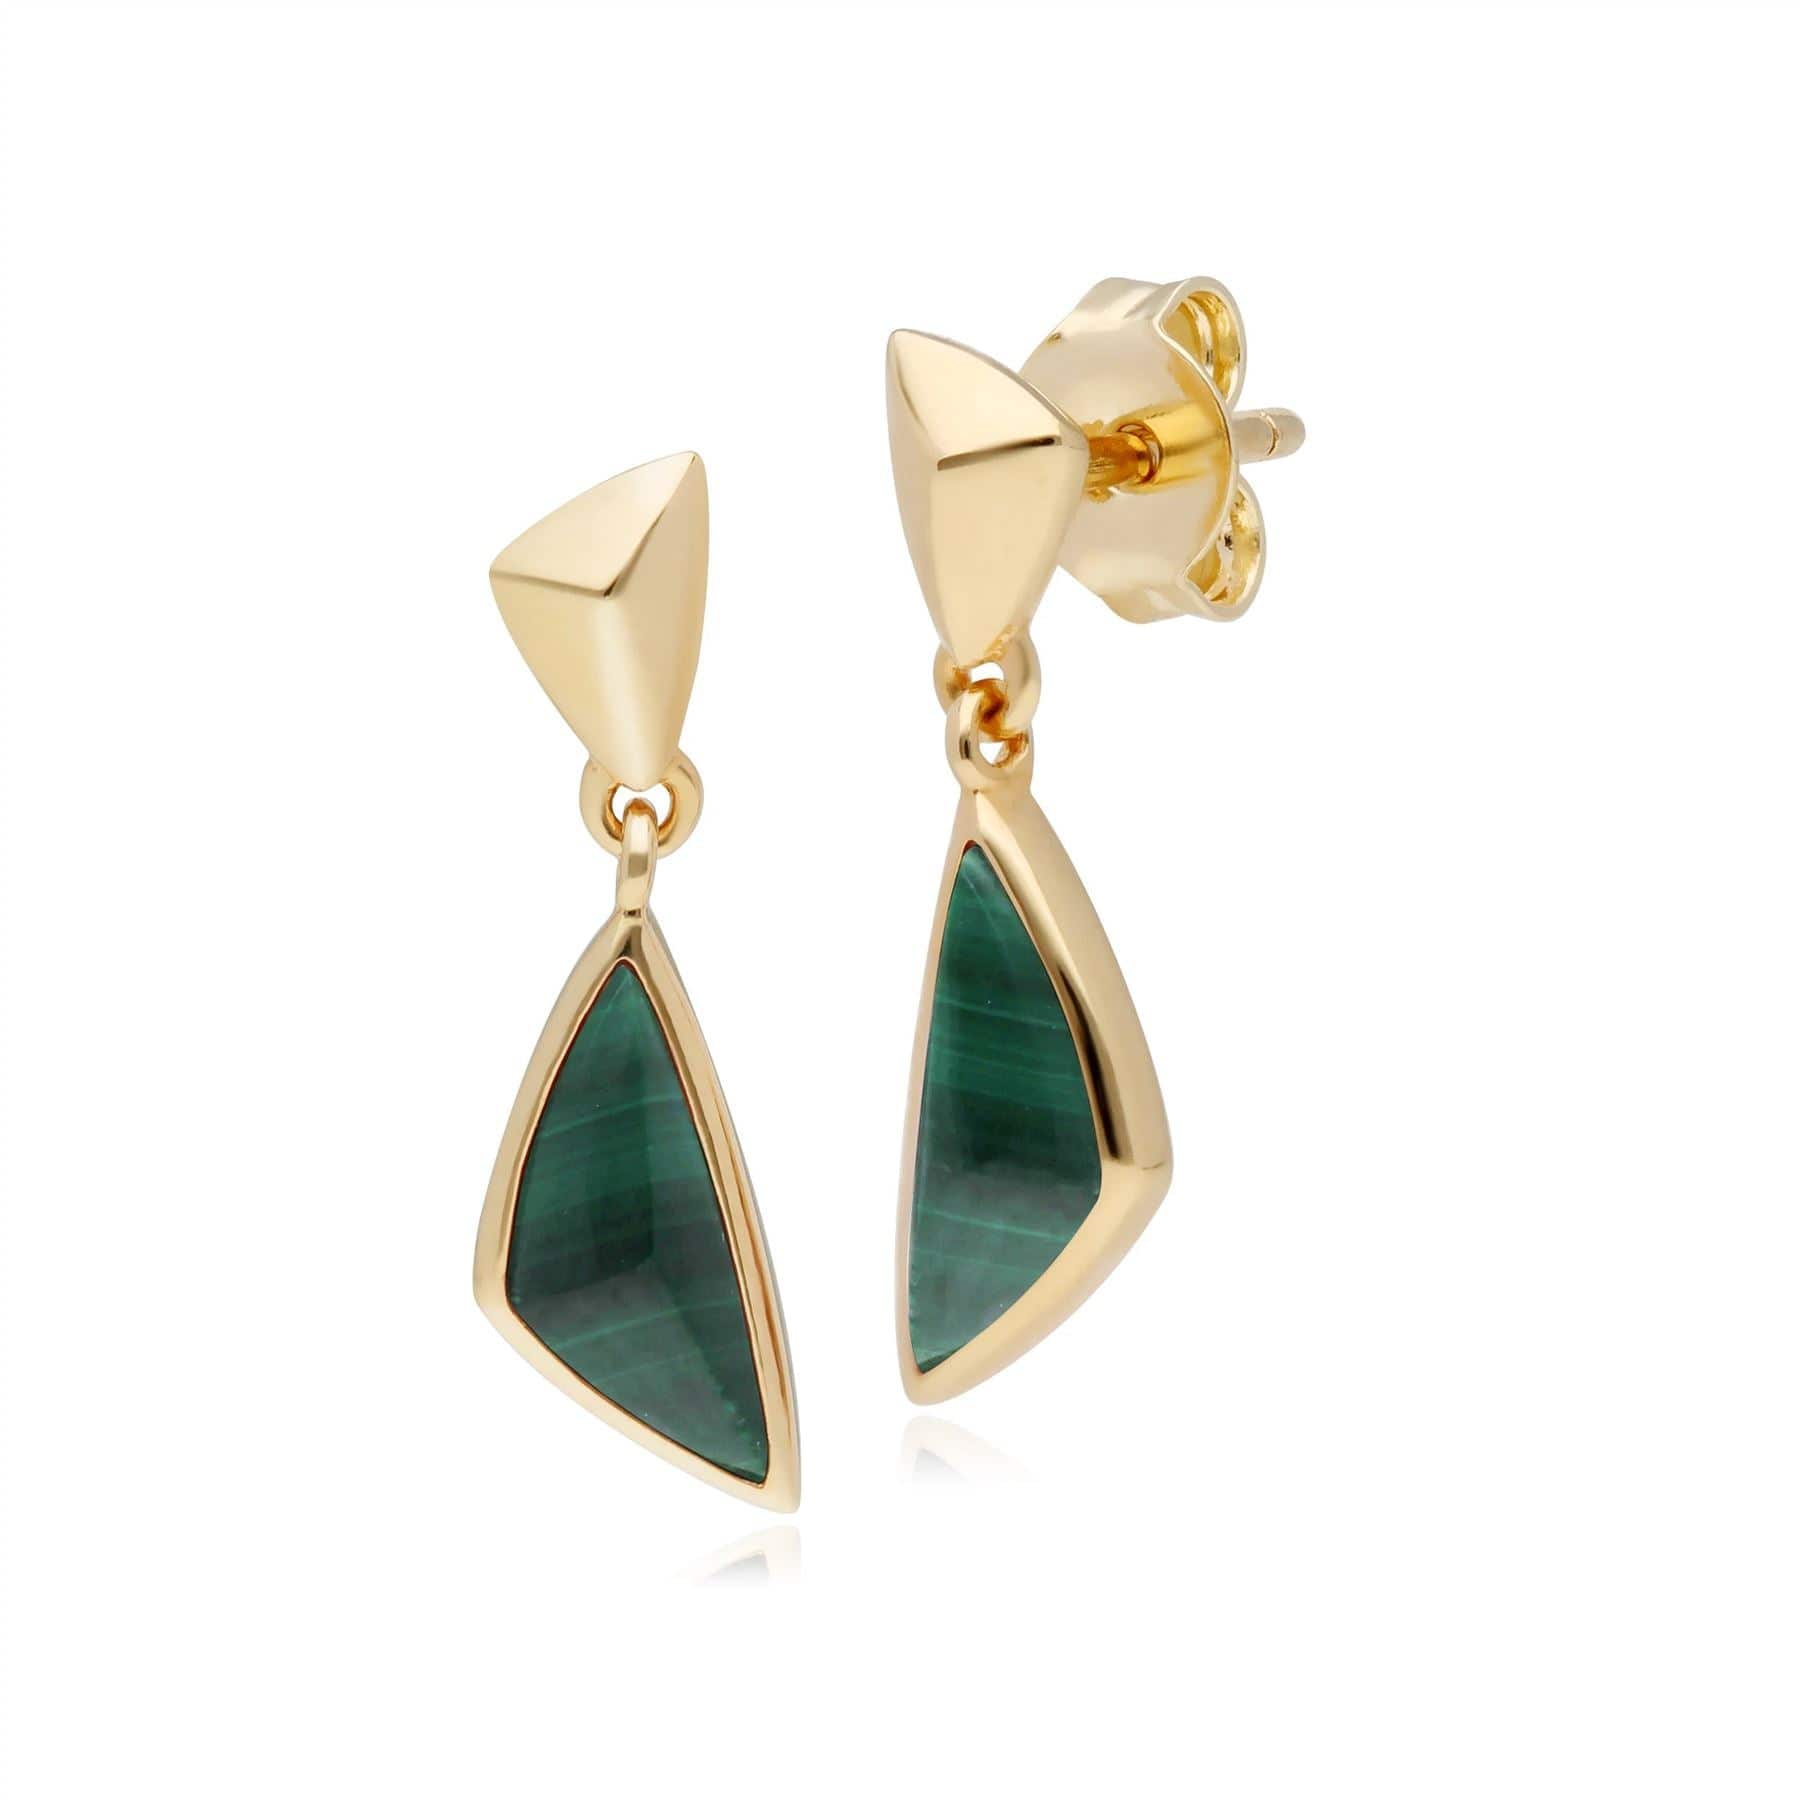 Micro Statement Malachite Drop Earrings in Gold Plated 925 Sterling Silver